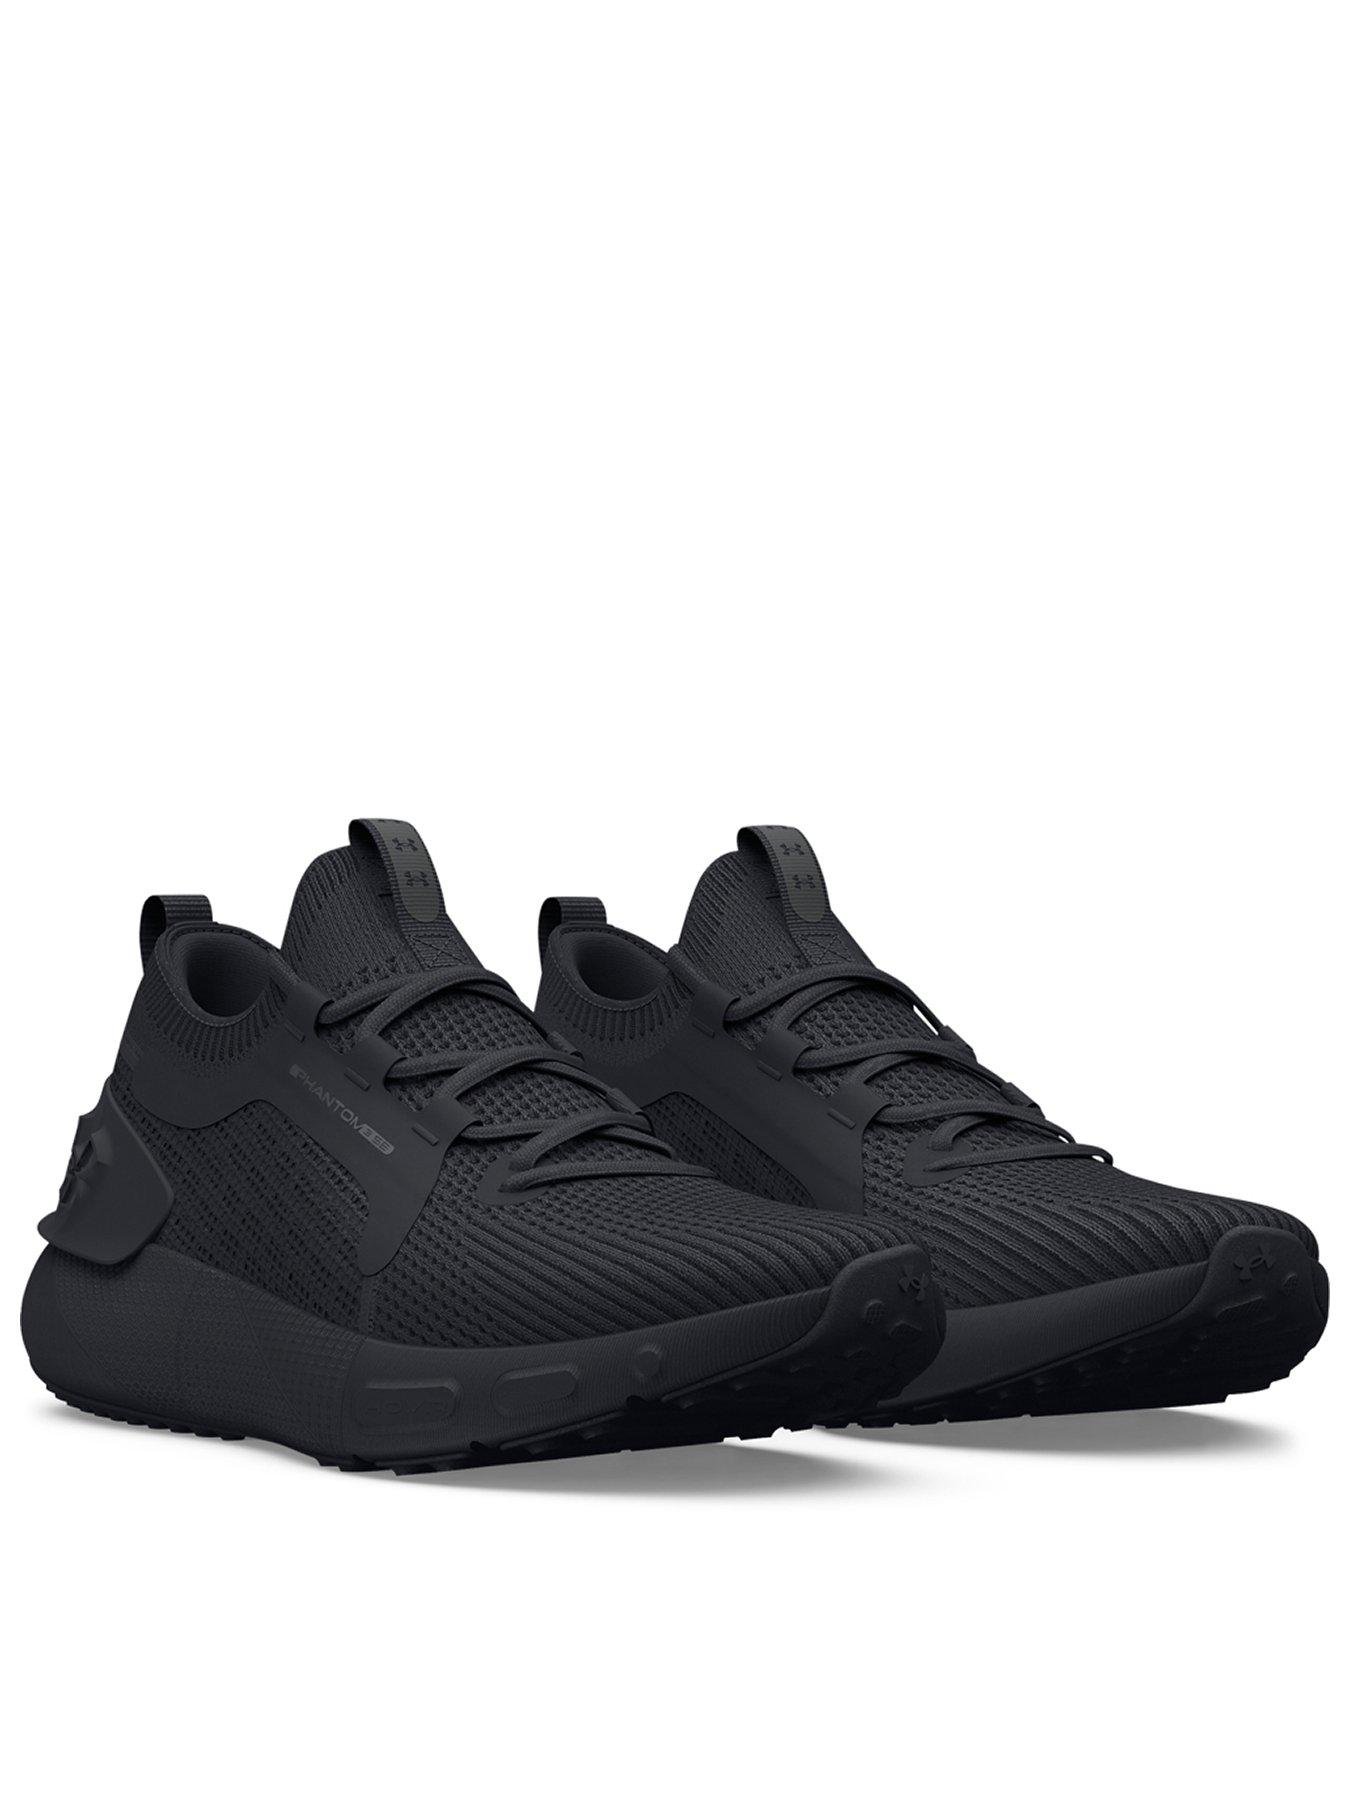 UNDER ARMOUR Charged Rogue 3 Storm Trainers - Black